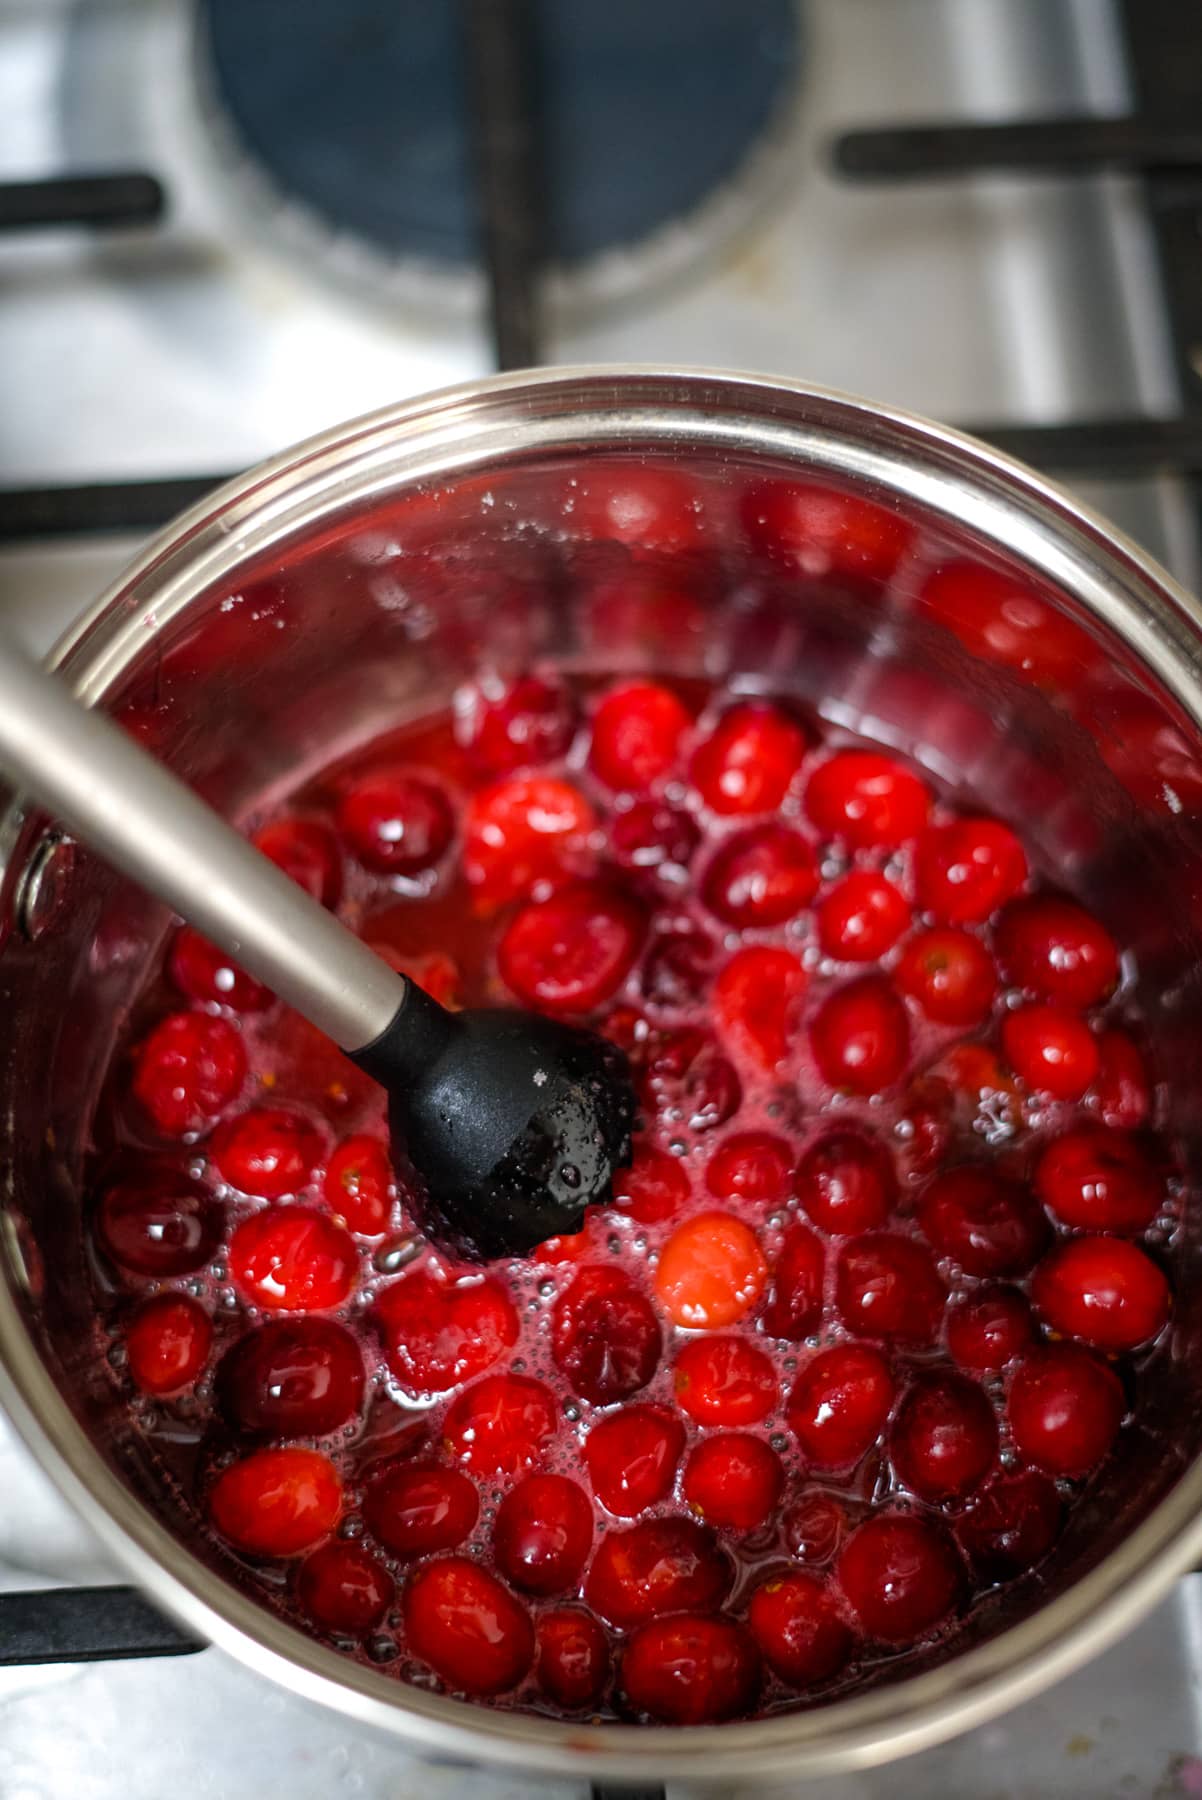 Cranberries simmering in a pot on a stove for cranberry mimosa.